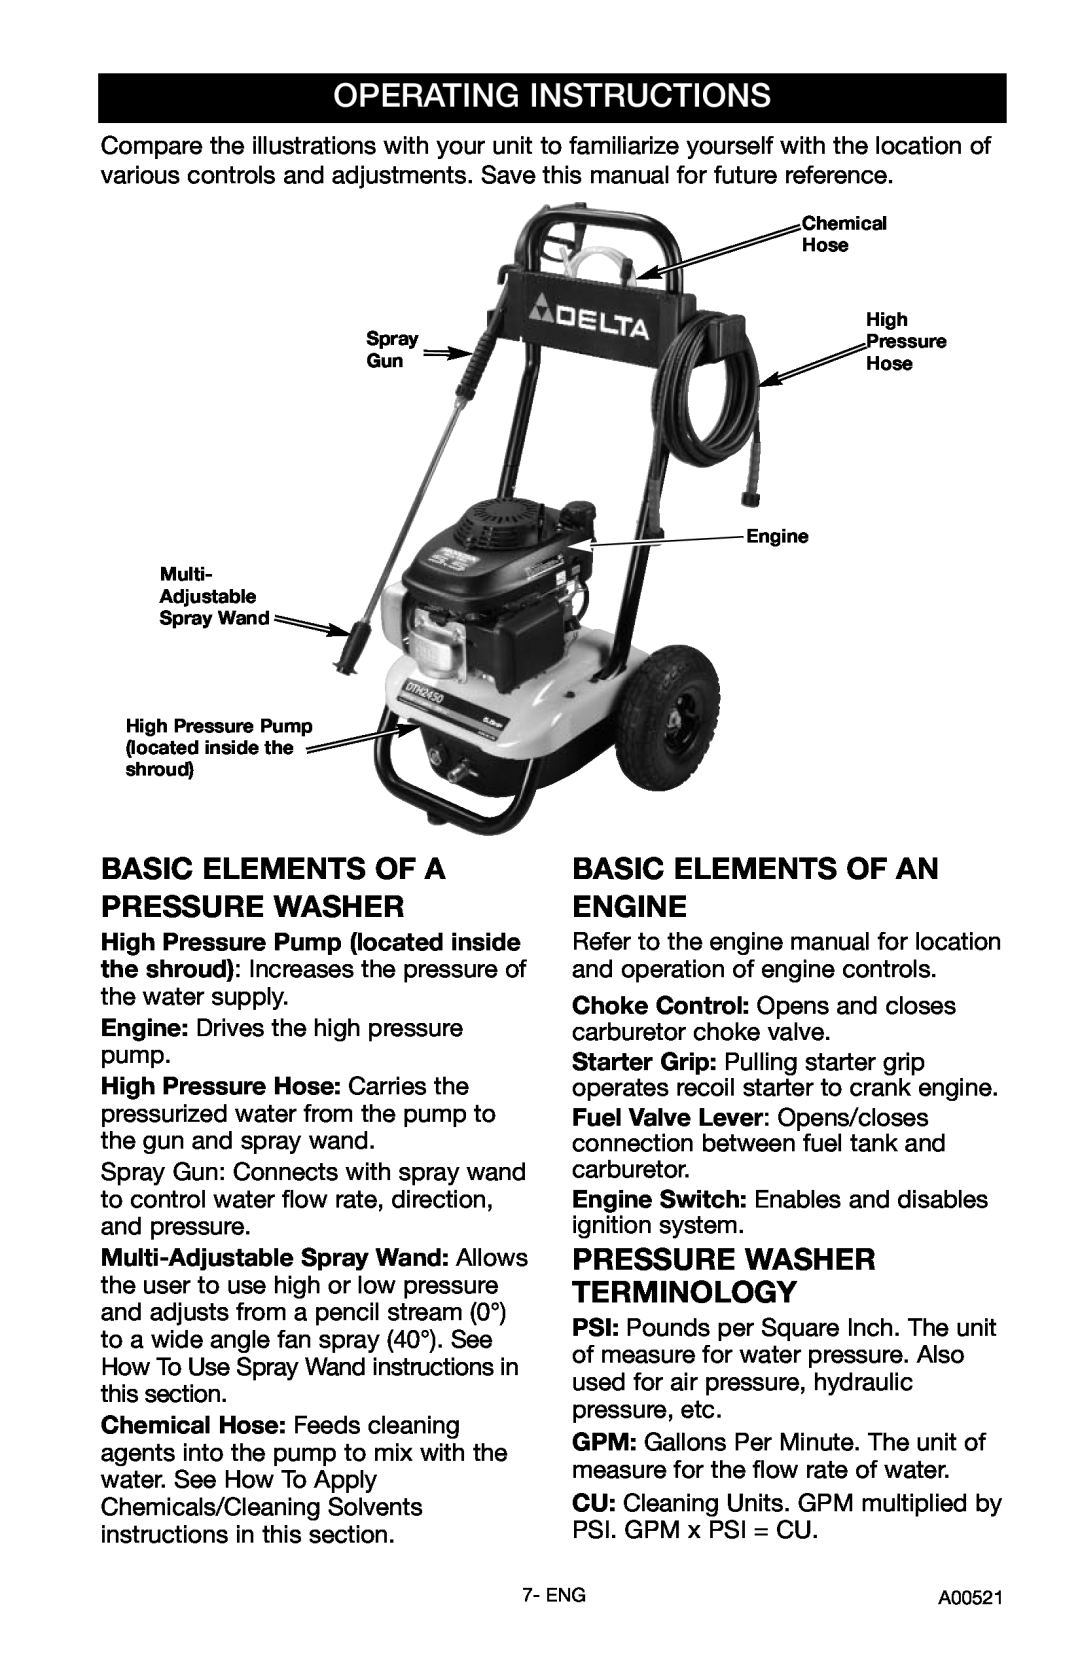 Delta DTH2450 instruction manual Operating Instructions, Basic Elements Of A Pressure Washer, Basic Elements Of An Engine 